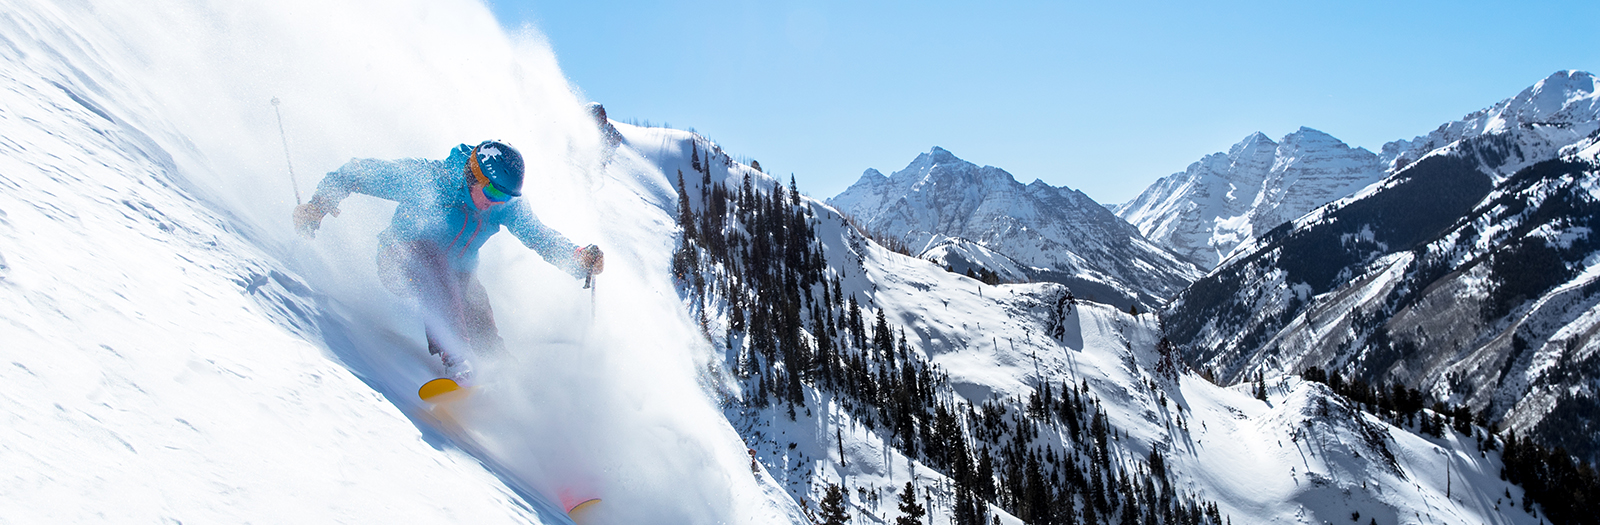 guide to expert skiing in aspen